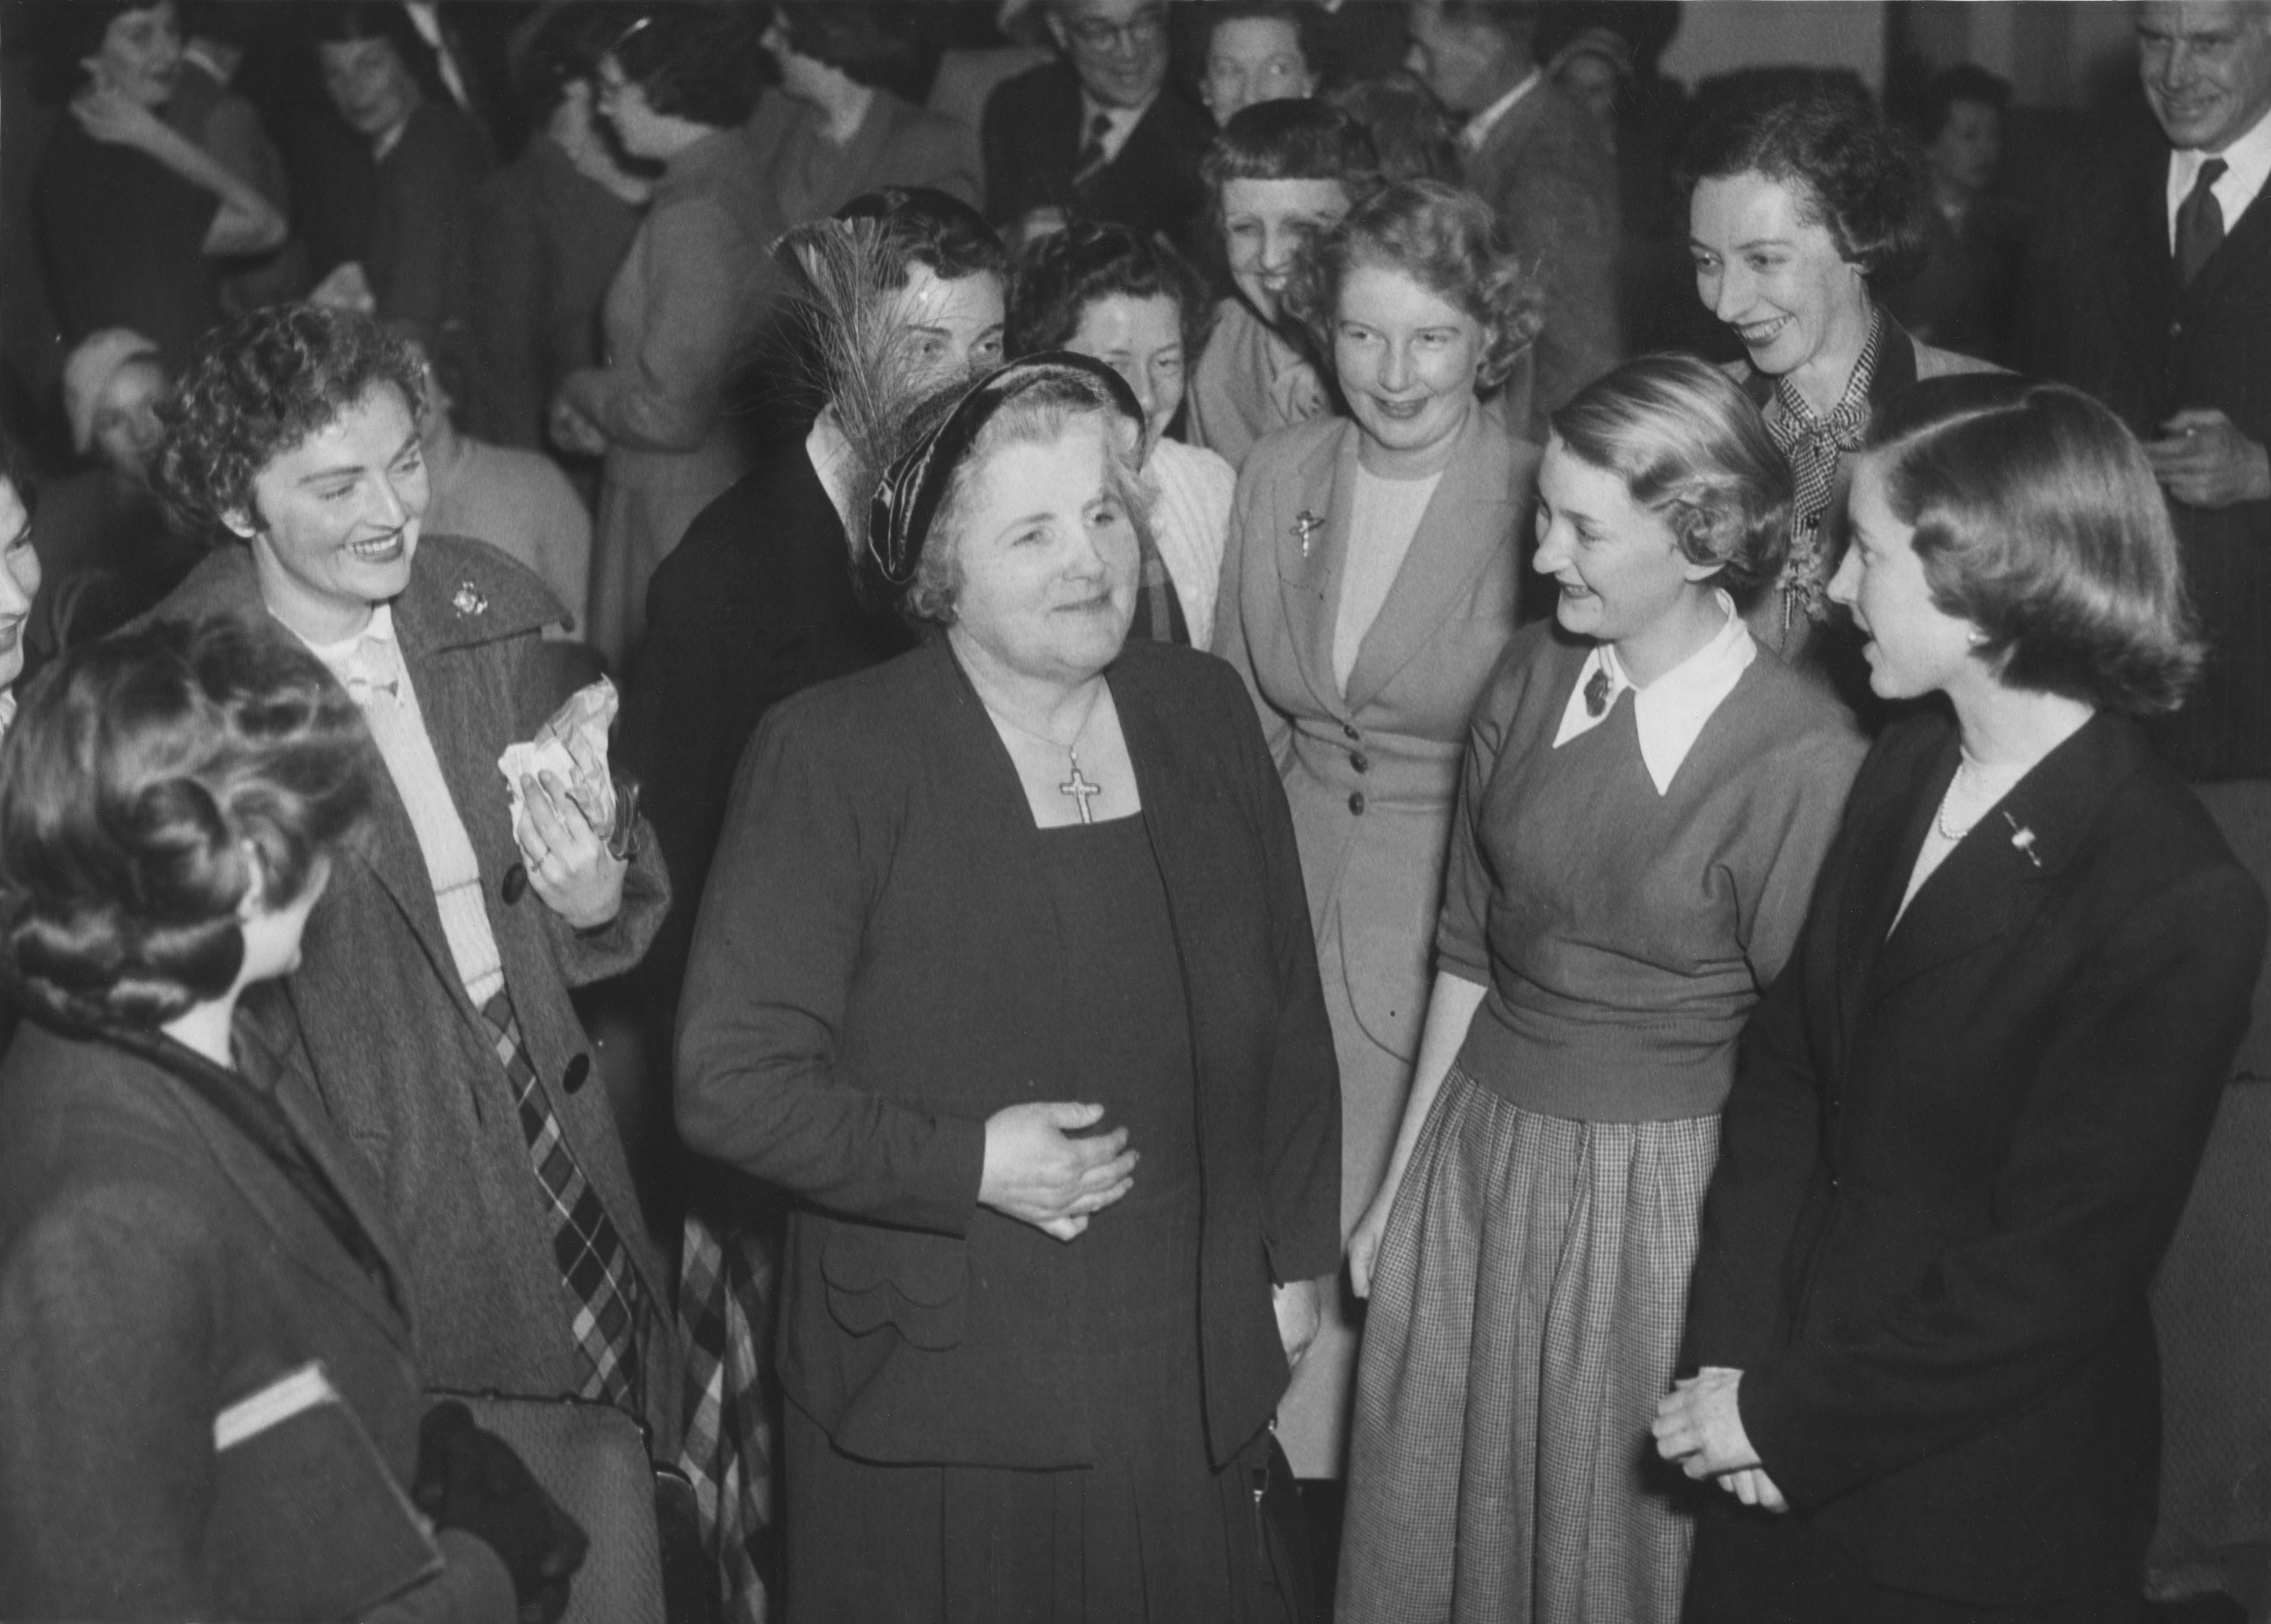 Dame Enid Lyons at a function in 1950.